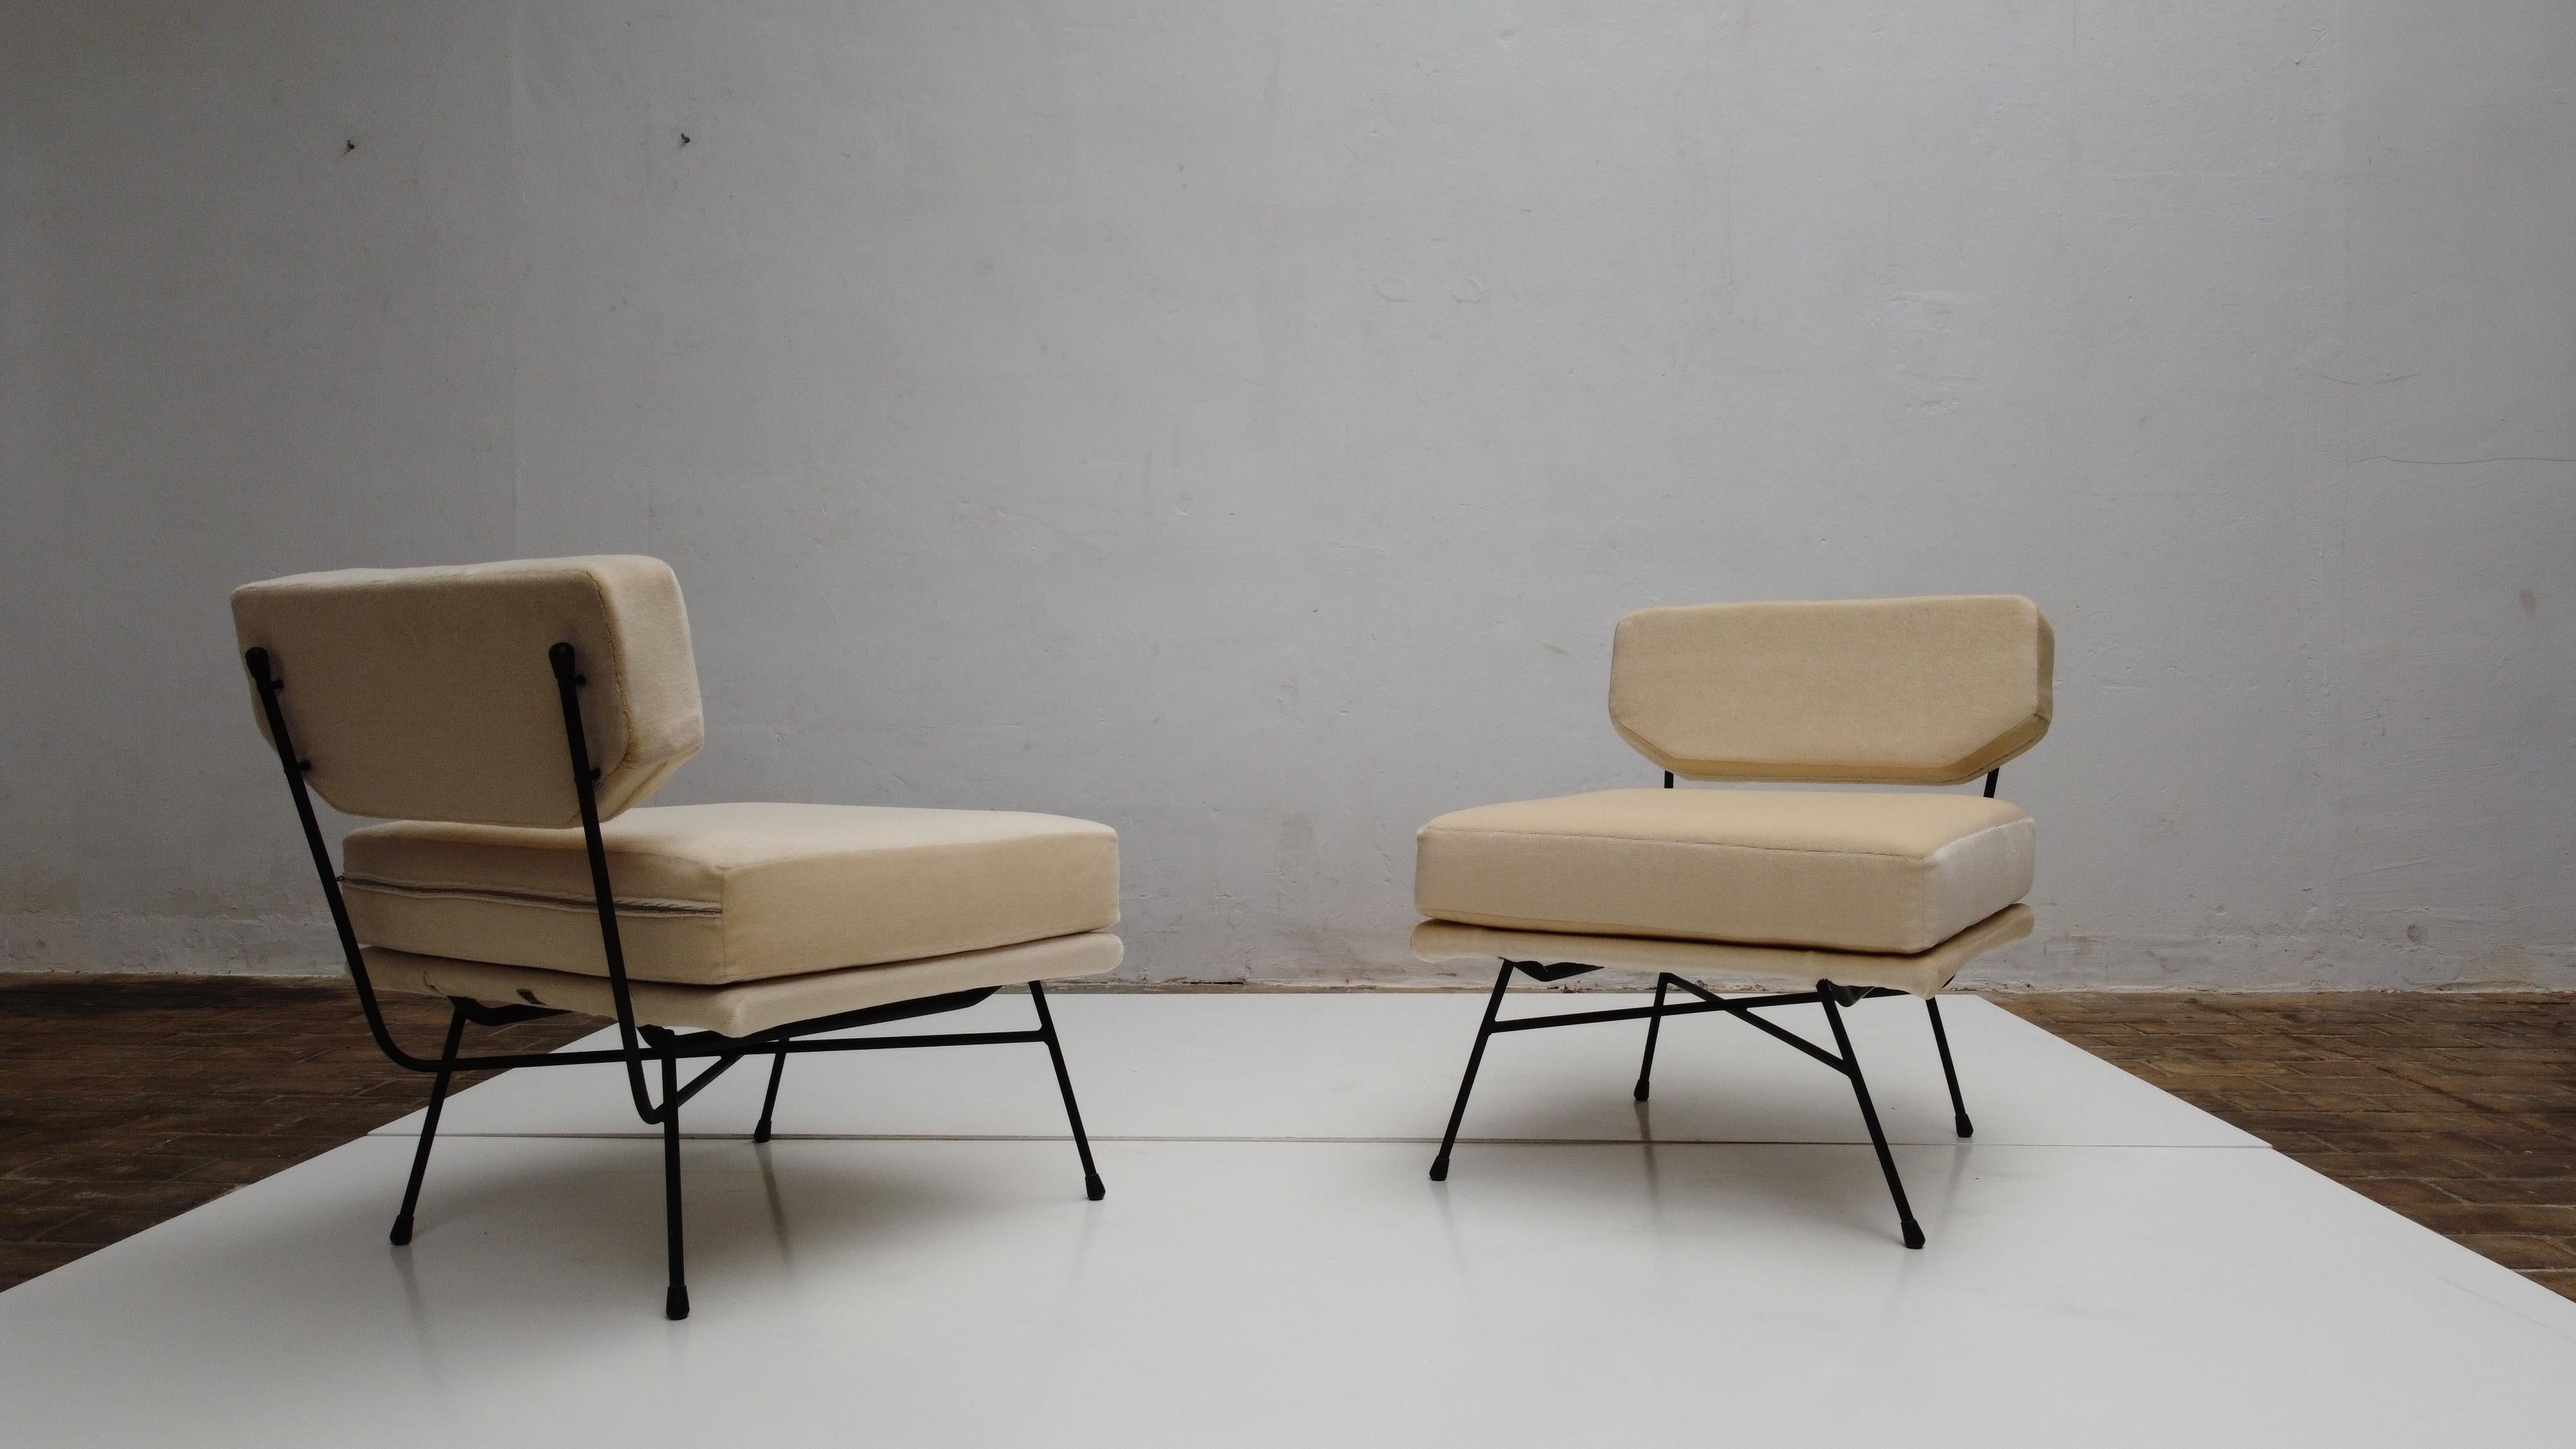 Pair of 'Elettra' Lounge Chairs by BBPR, Arflex, Italy 1953, Compasso D'Oro 1954 For Sale 3